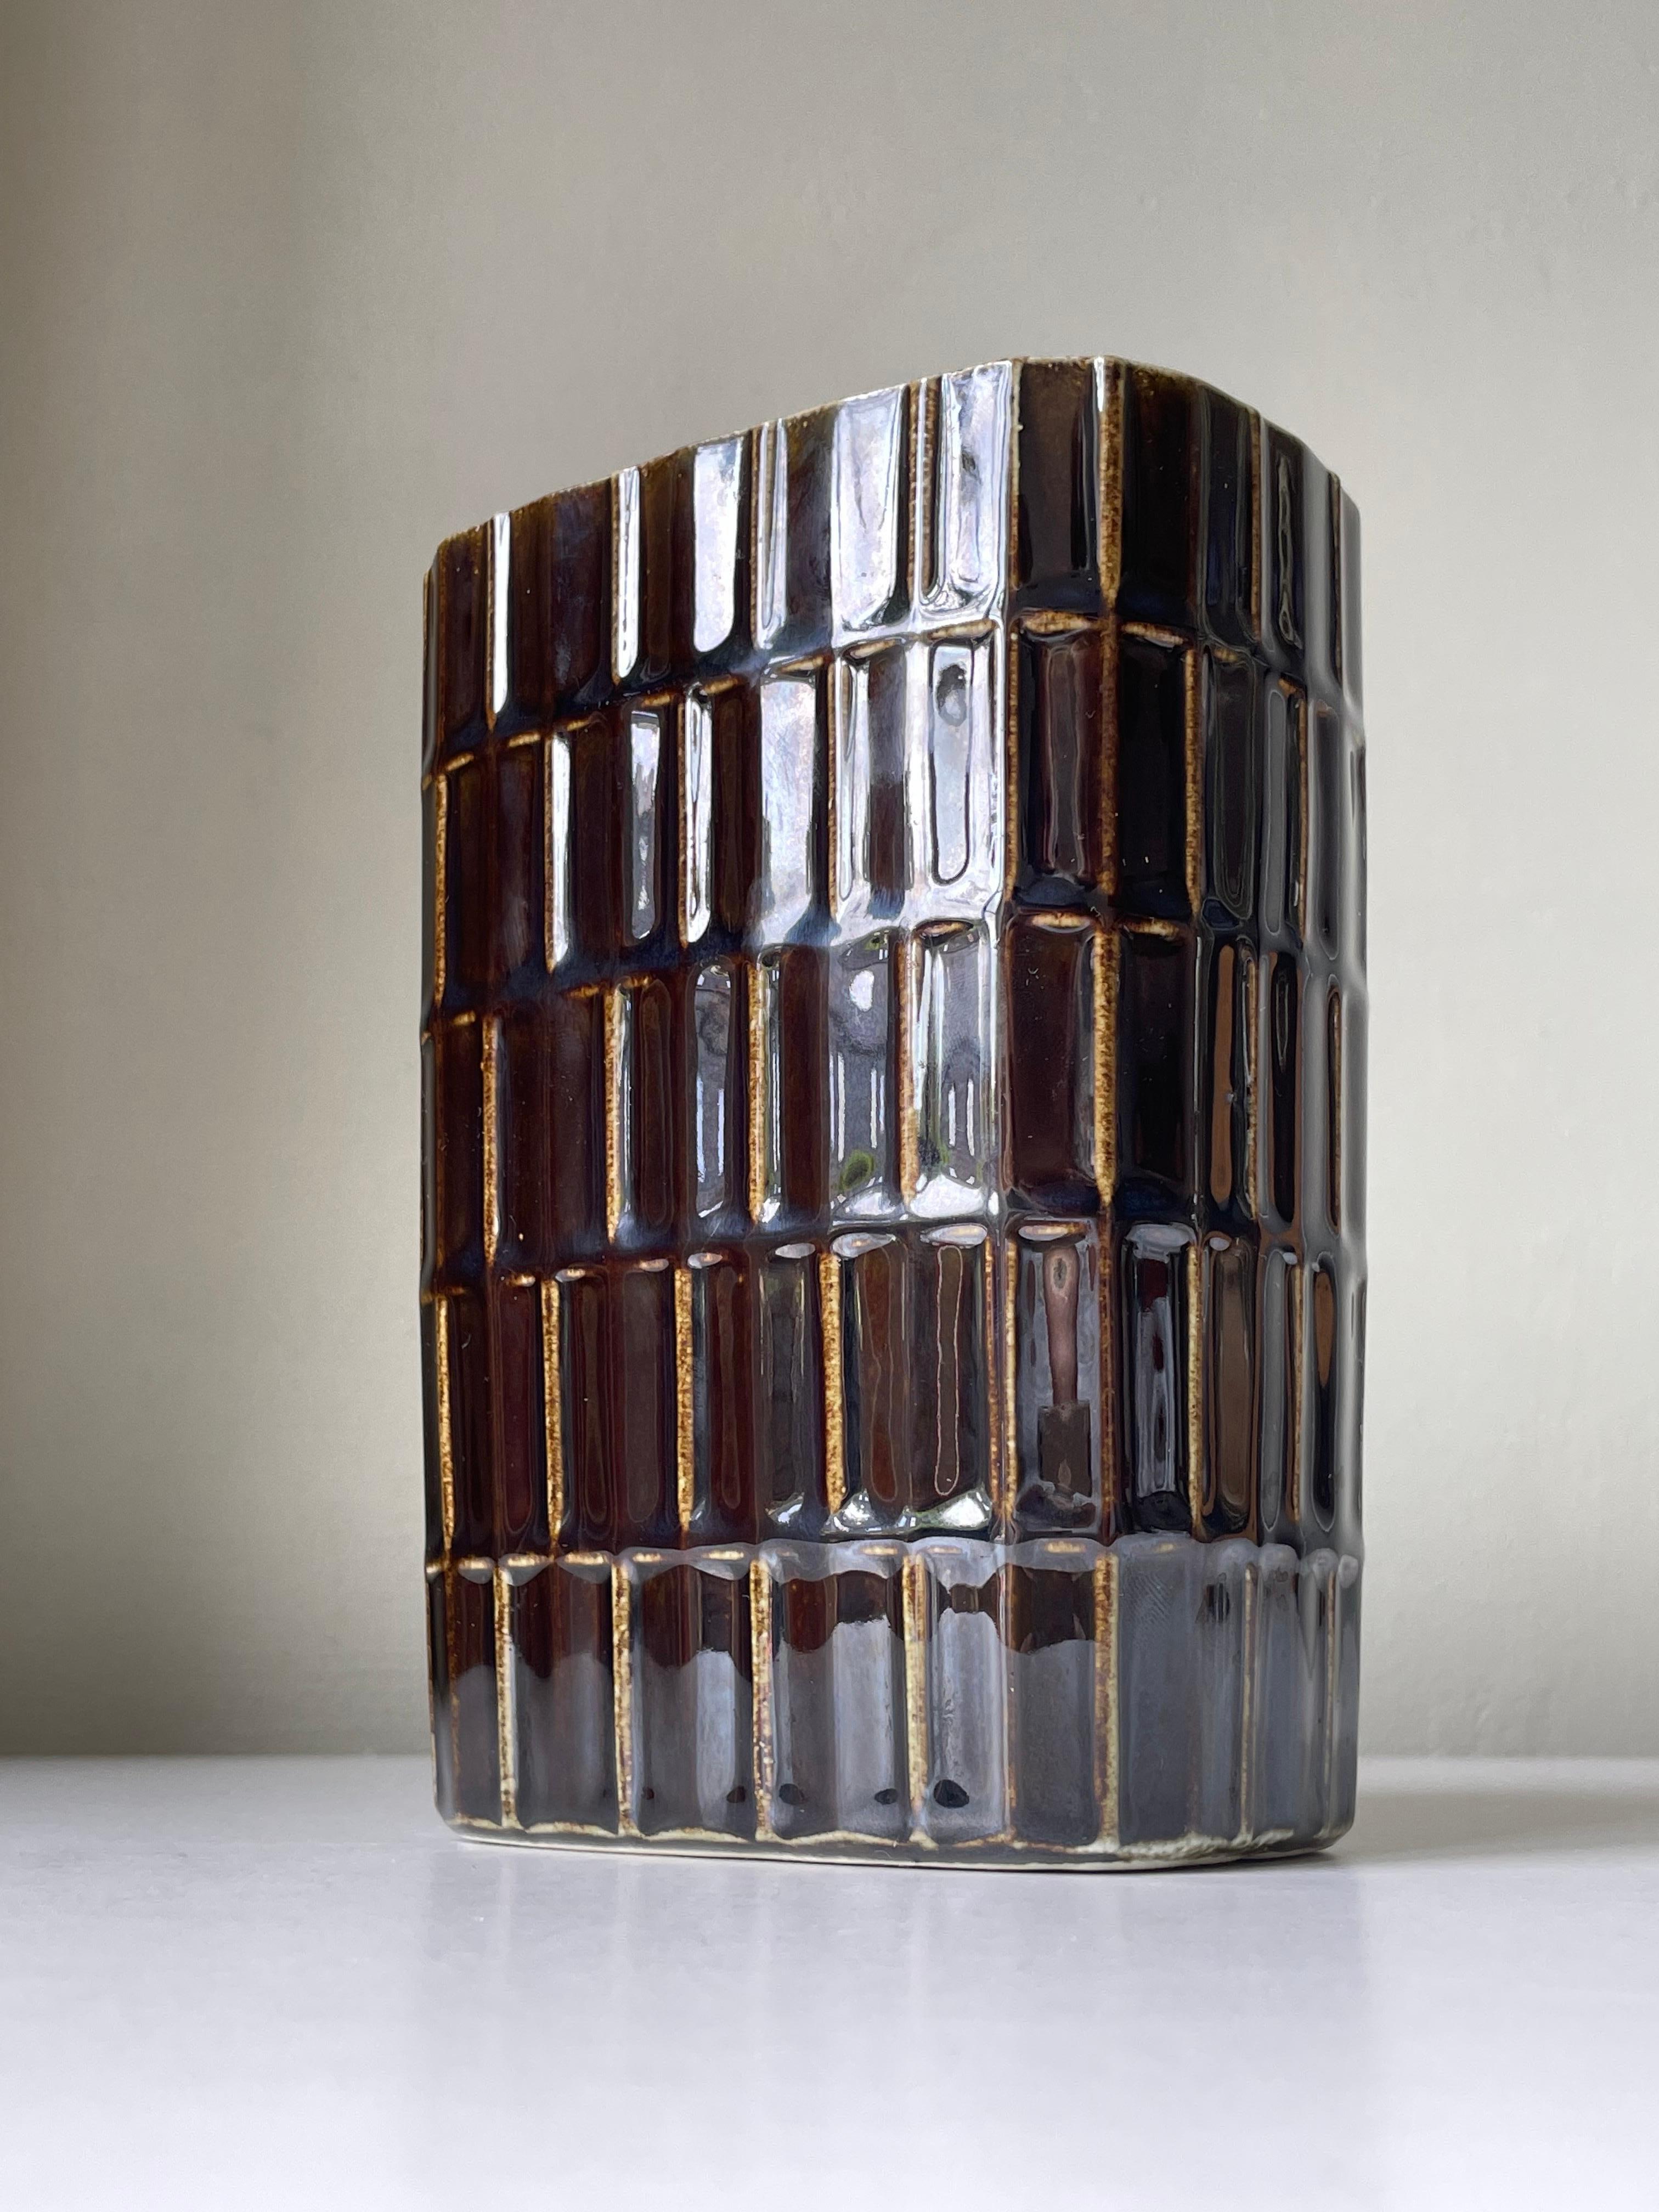 Scandinavian midcentury modern ceramic vase with chocolate and caramel brown colors on tiered geometric relief pattern. Designed by Göran Bäck for Finnish Arabia in the 1960s. Stamped under base. Beautiful vintage condition. 
Finland, 1960s. 